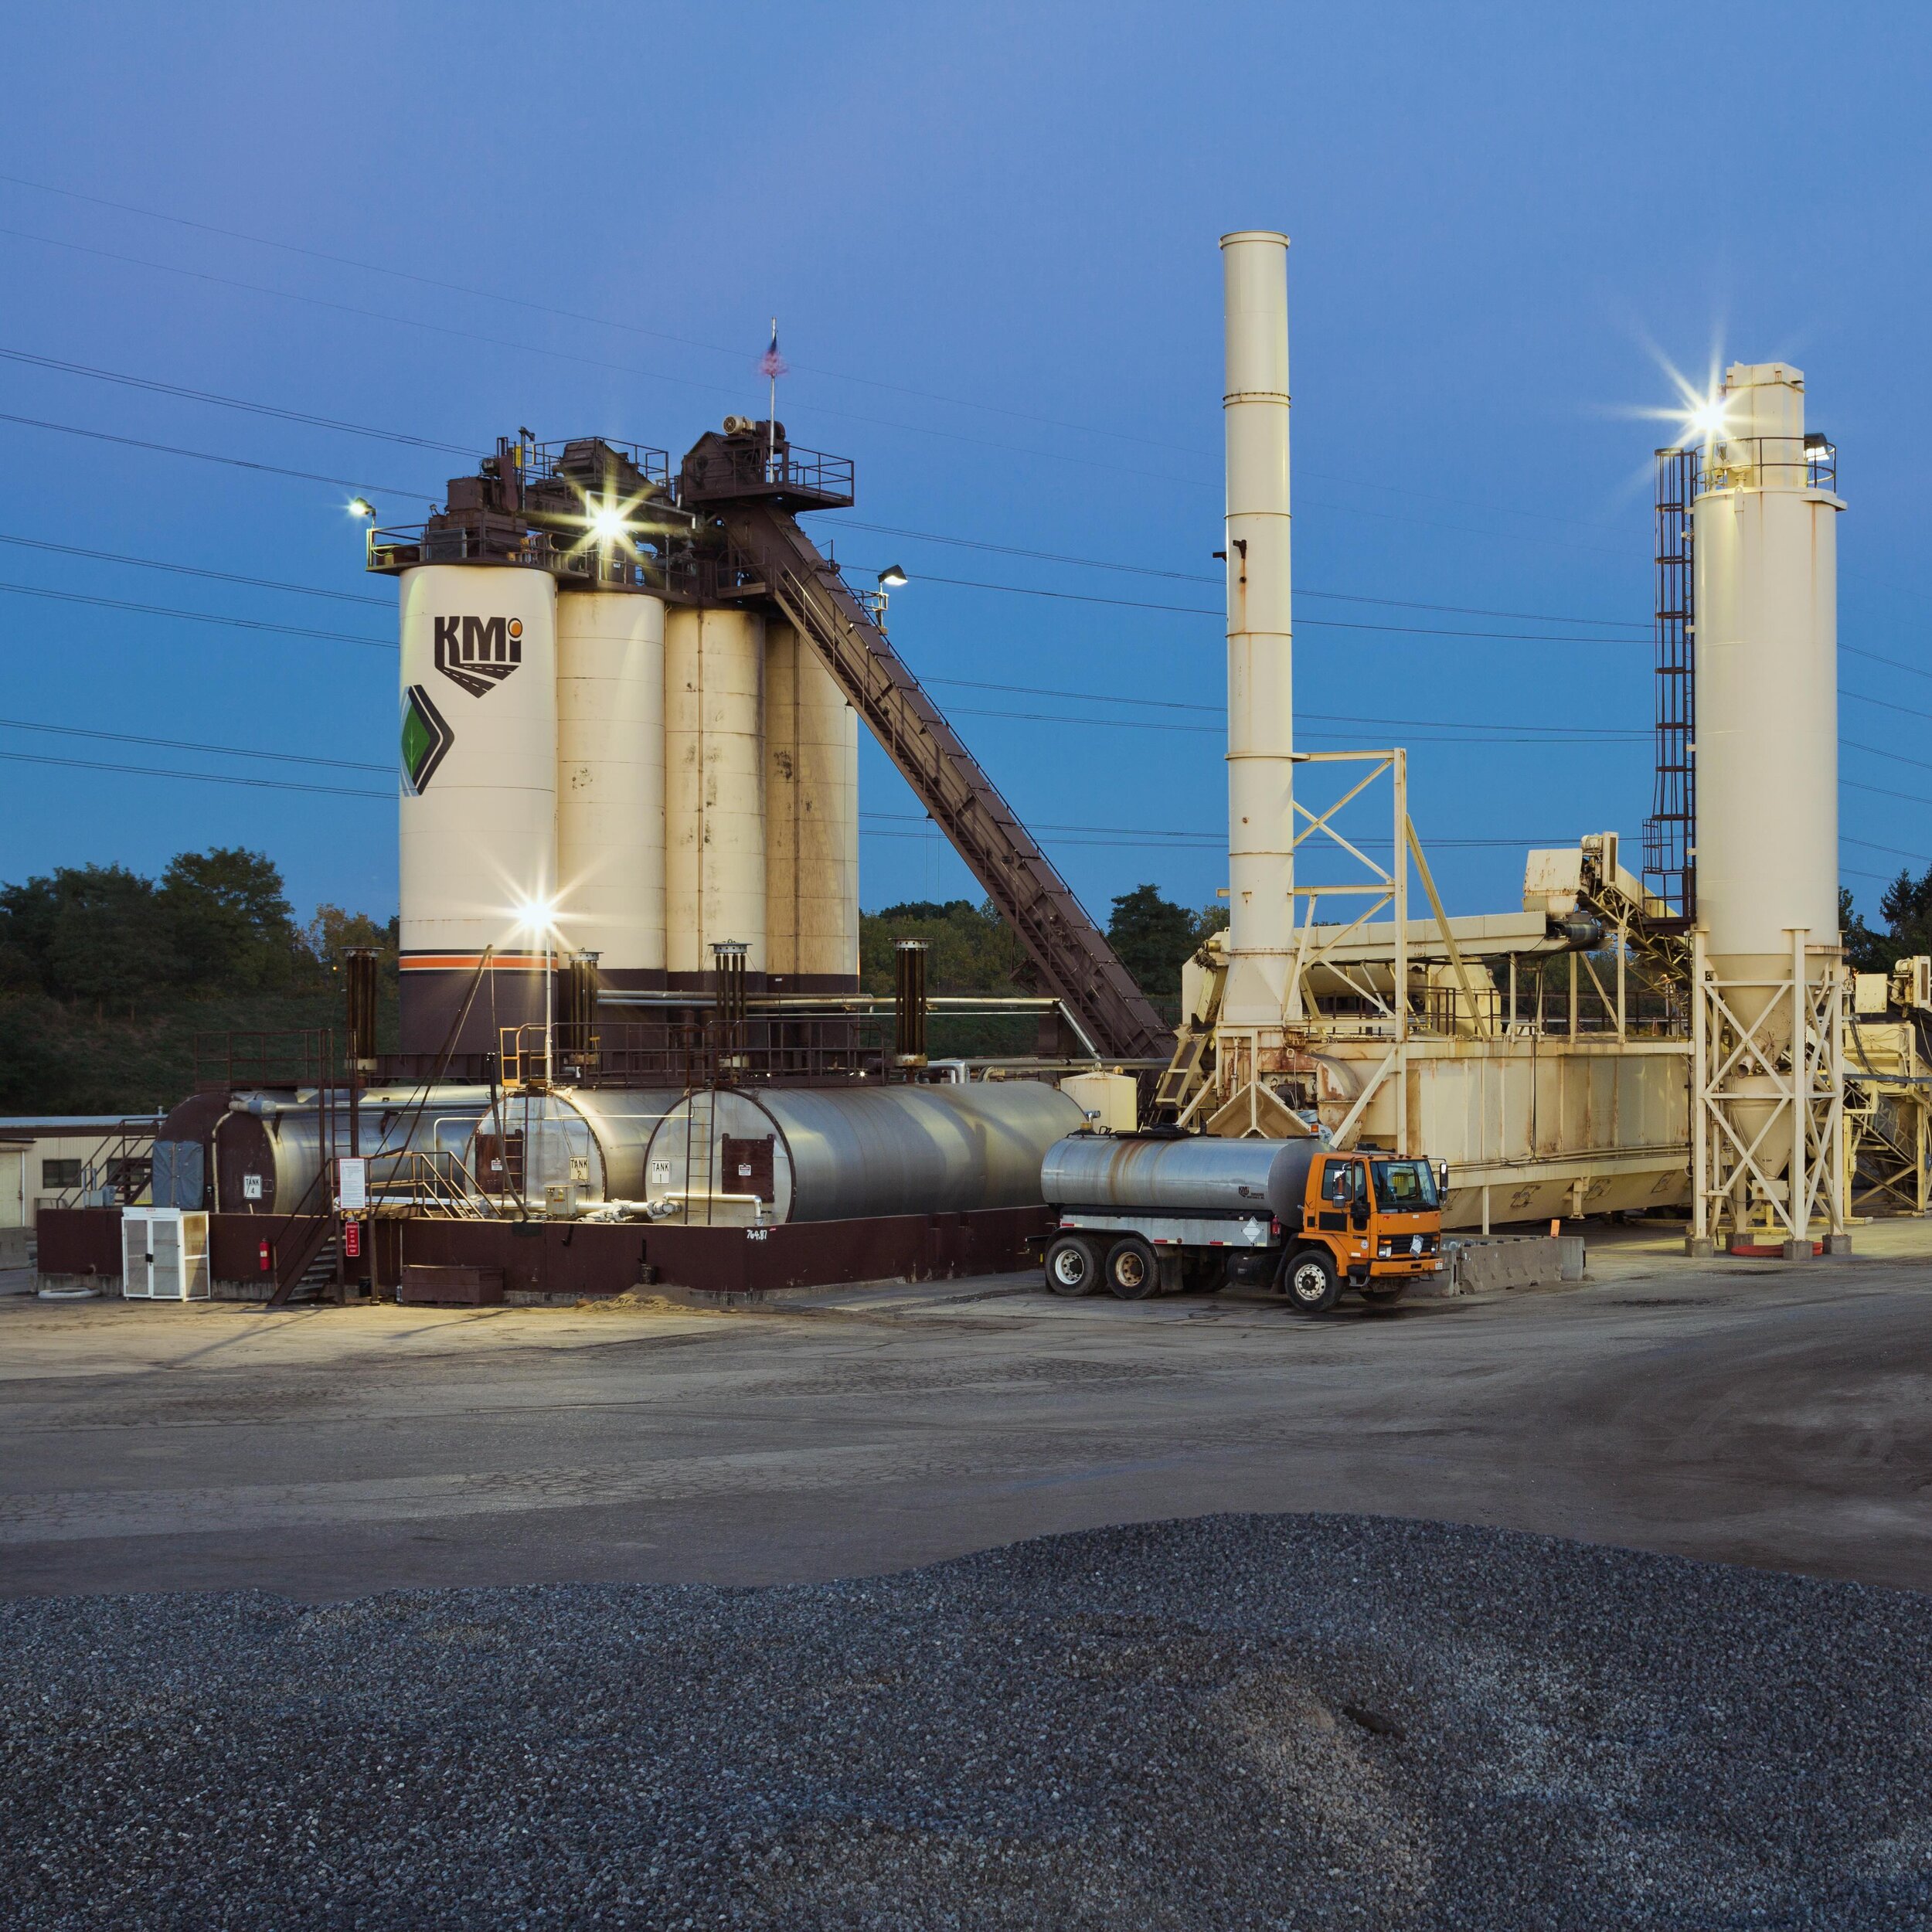 The U.S. has about 3,600 asphalt production sites and produced about 420 million tons in 2019. 

There are multiple asphalt suppliers in the Columbus market. Some commonly used suppliers are @kokosing1951 @theshellyco @rapmanagement @gerken_companies